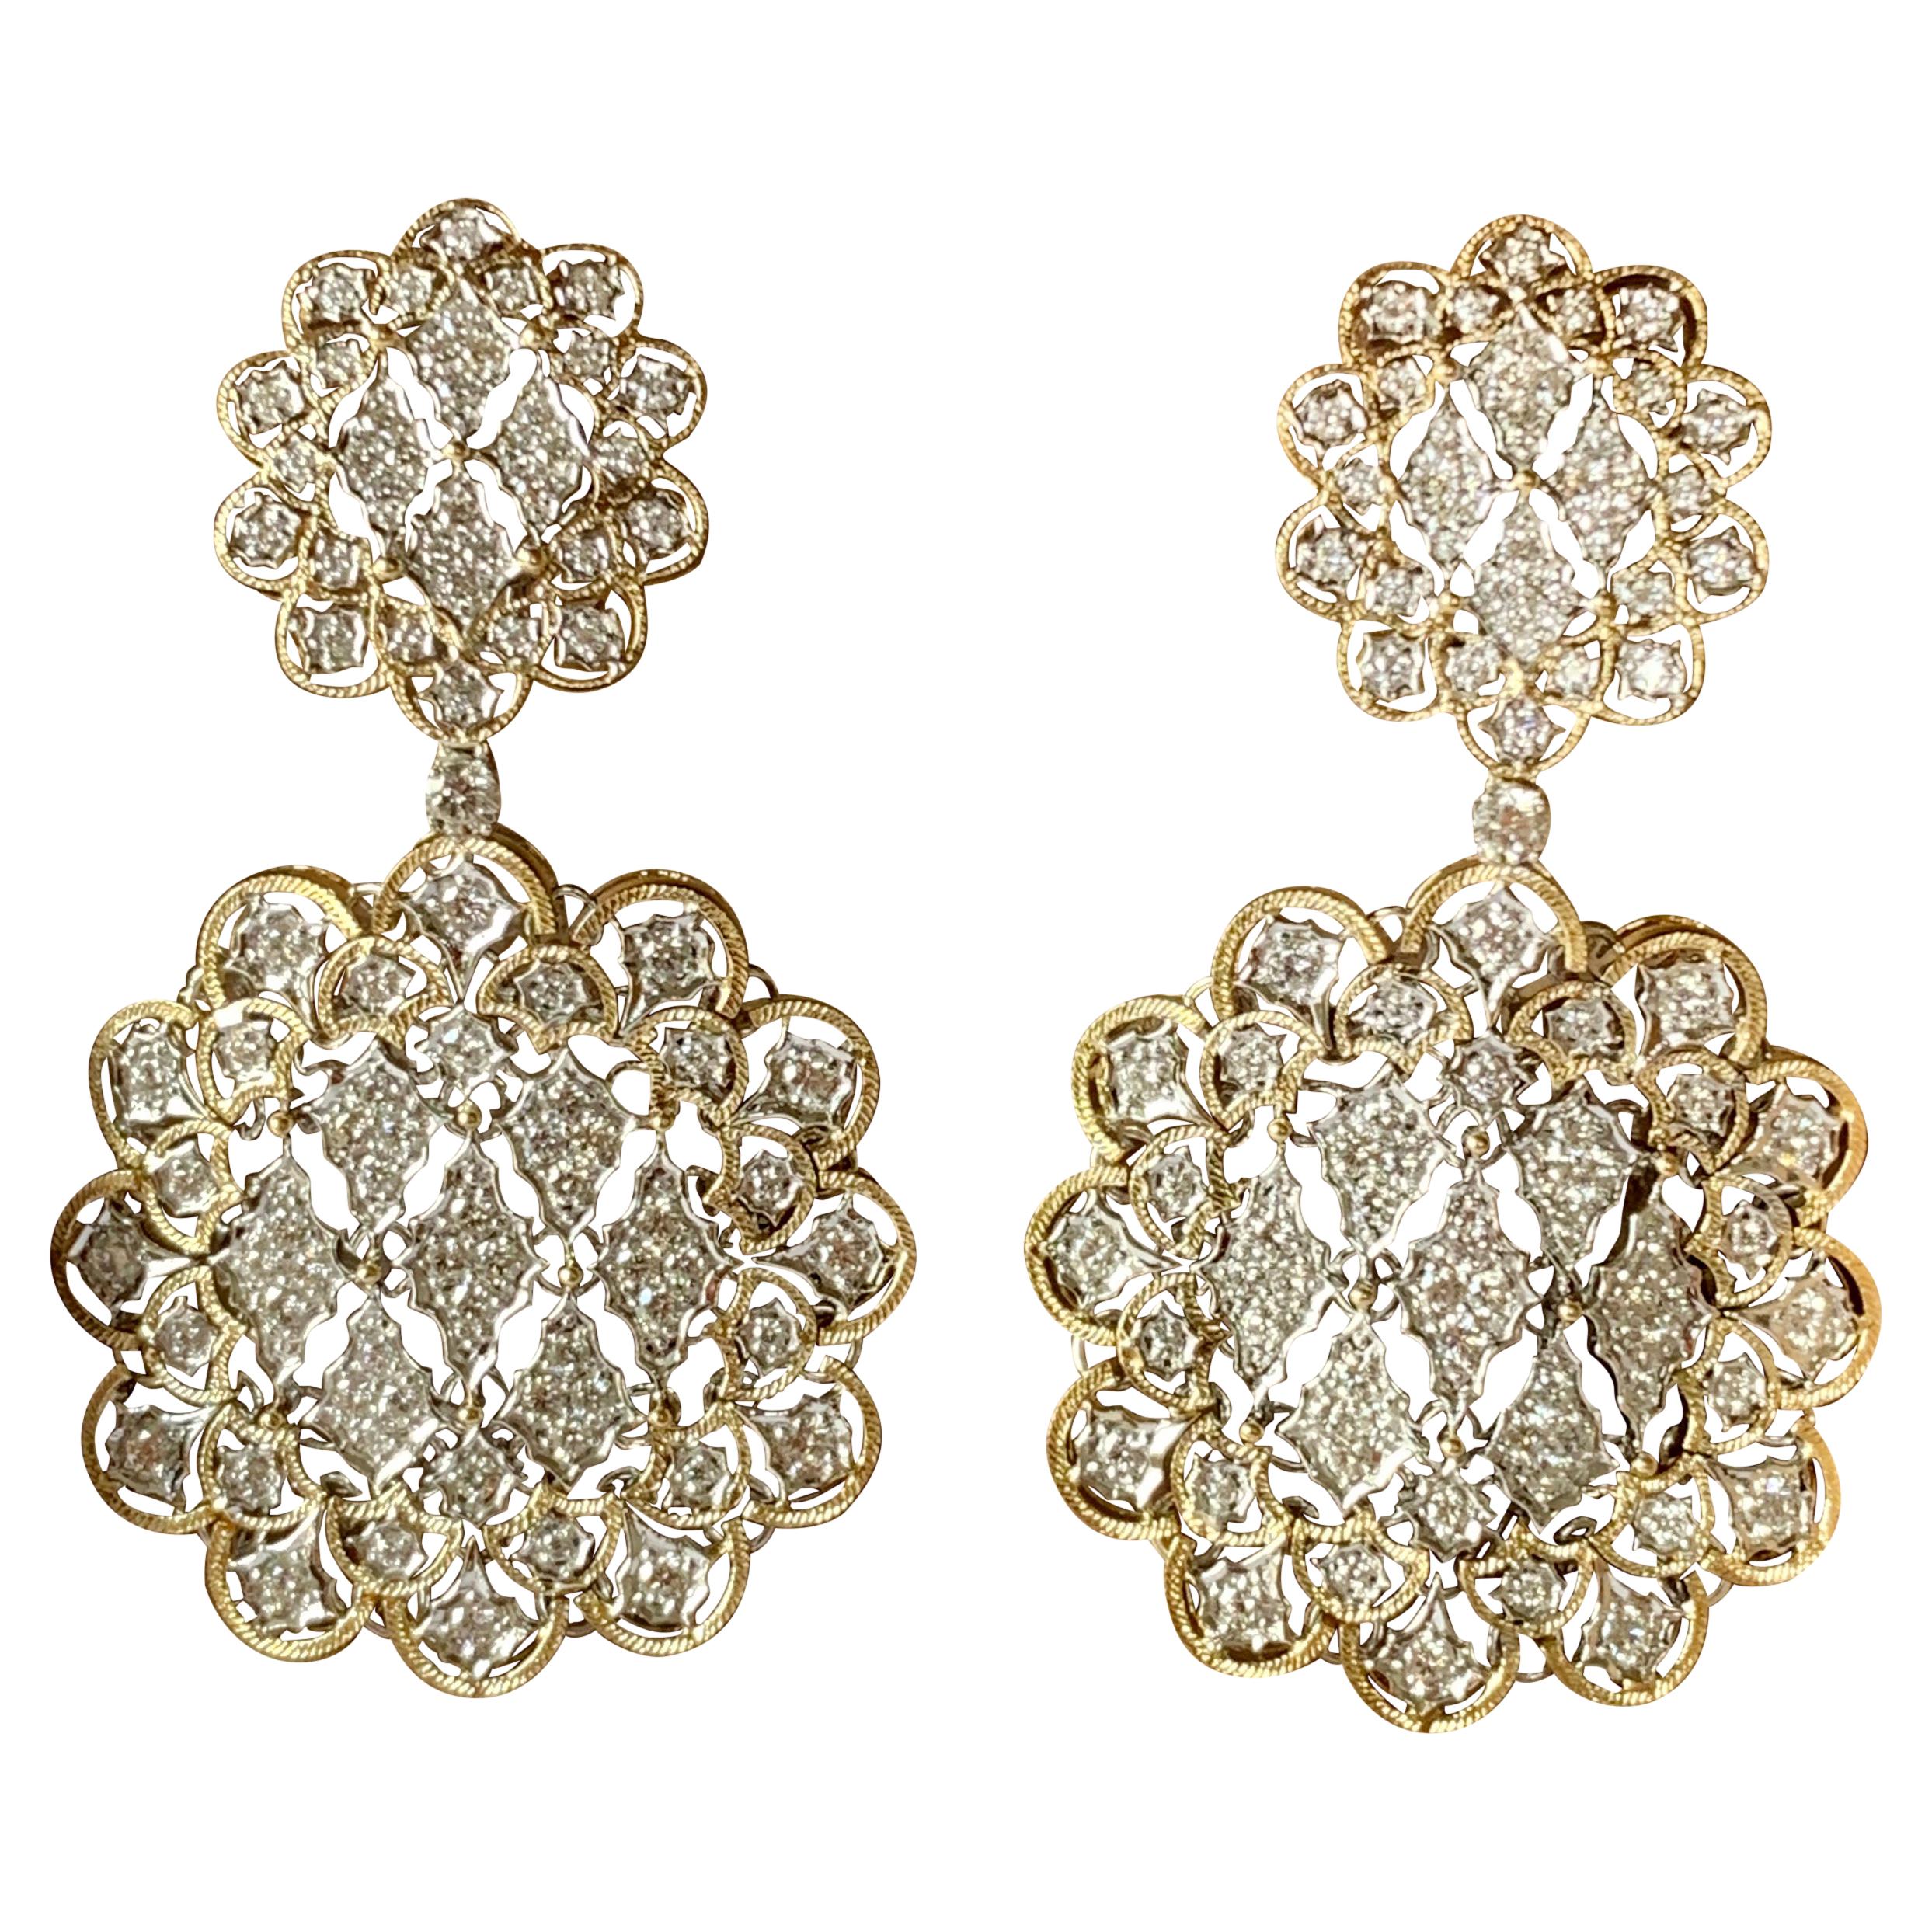 Pair of Glorious 18 Karat White and Yellow Gold Earrings with Diamonds For Sale